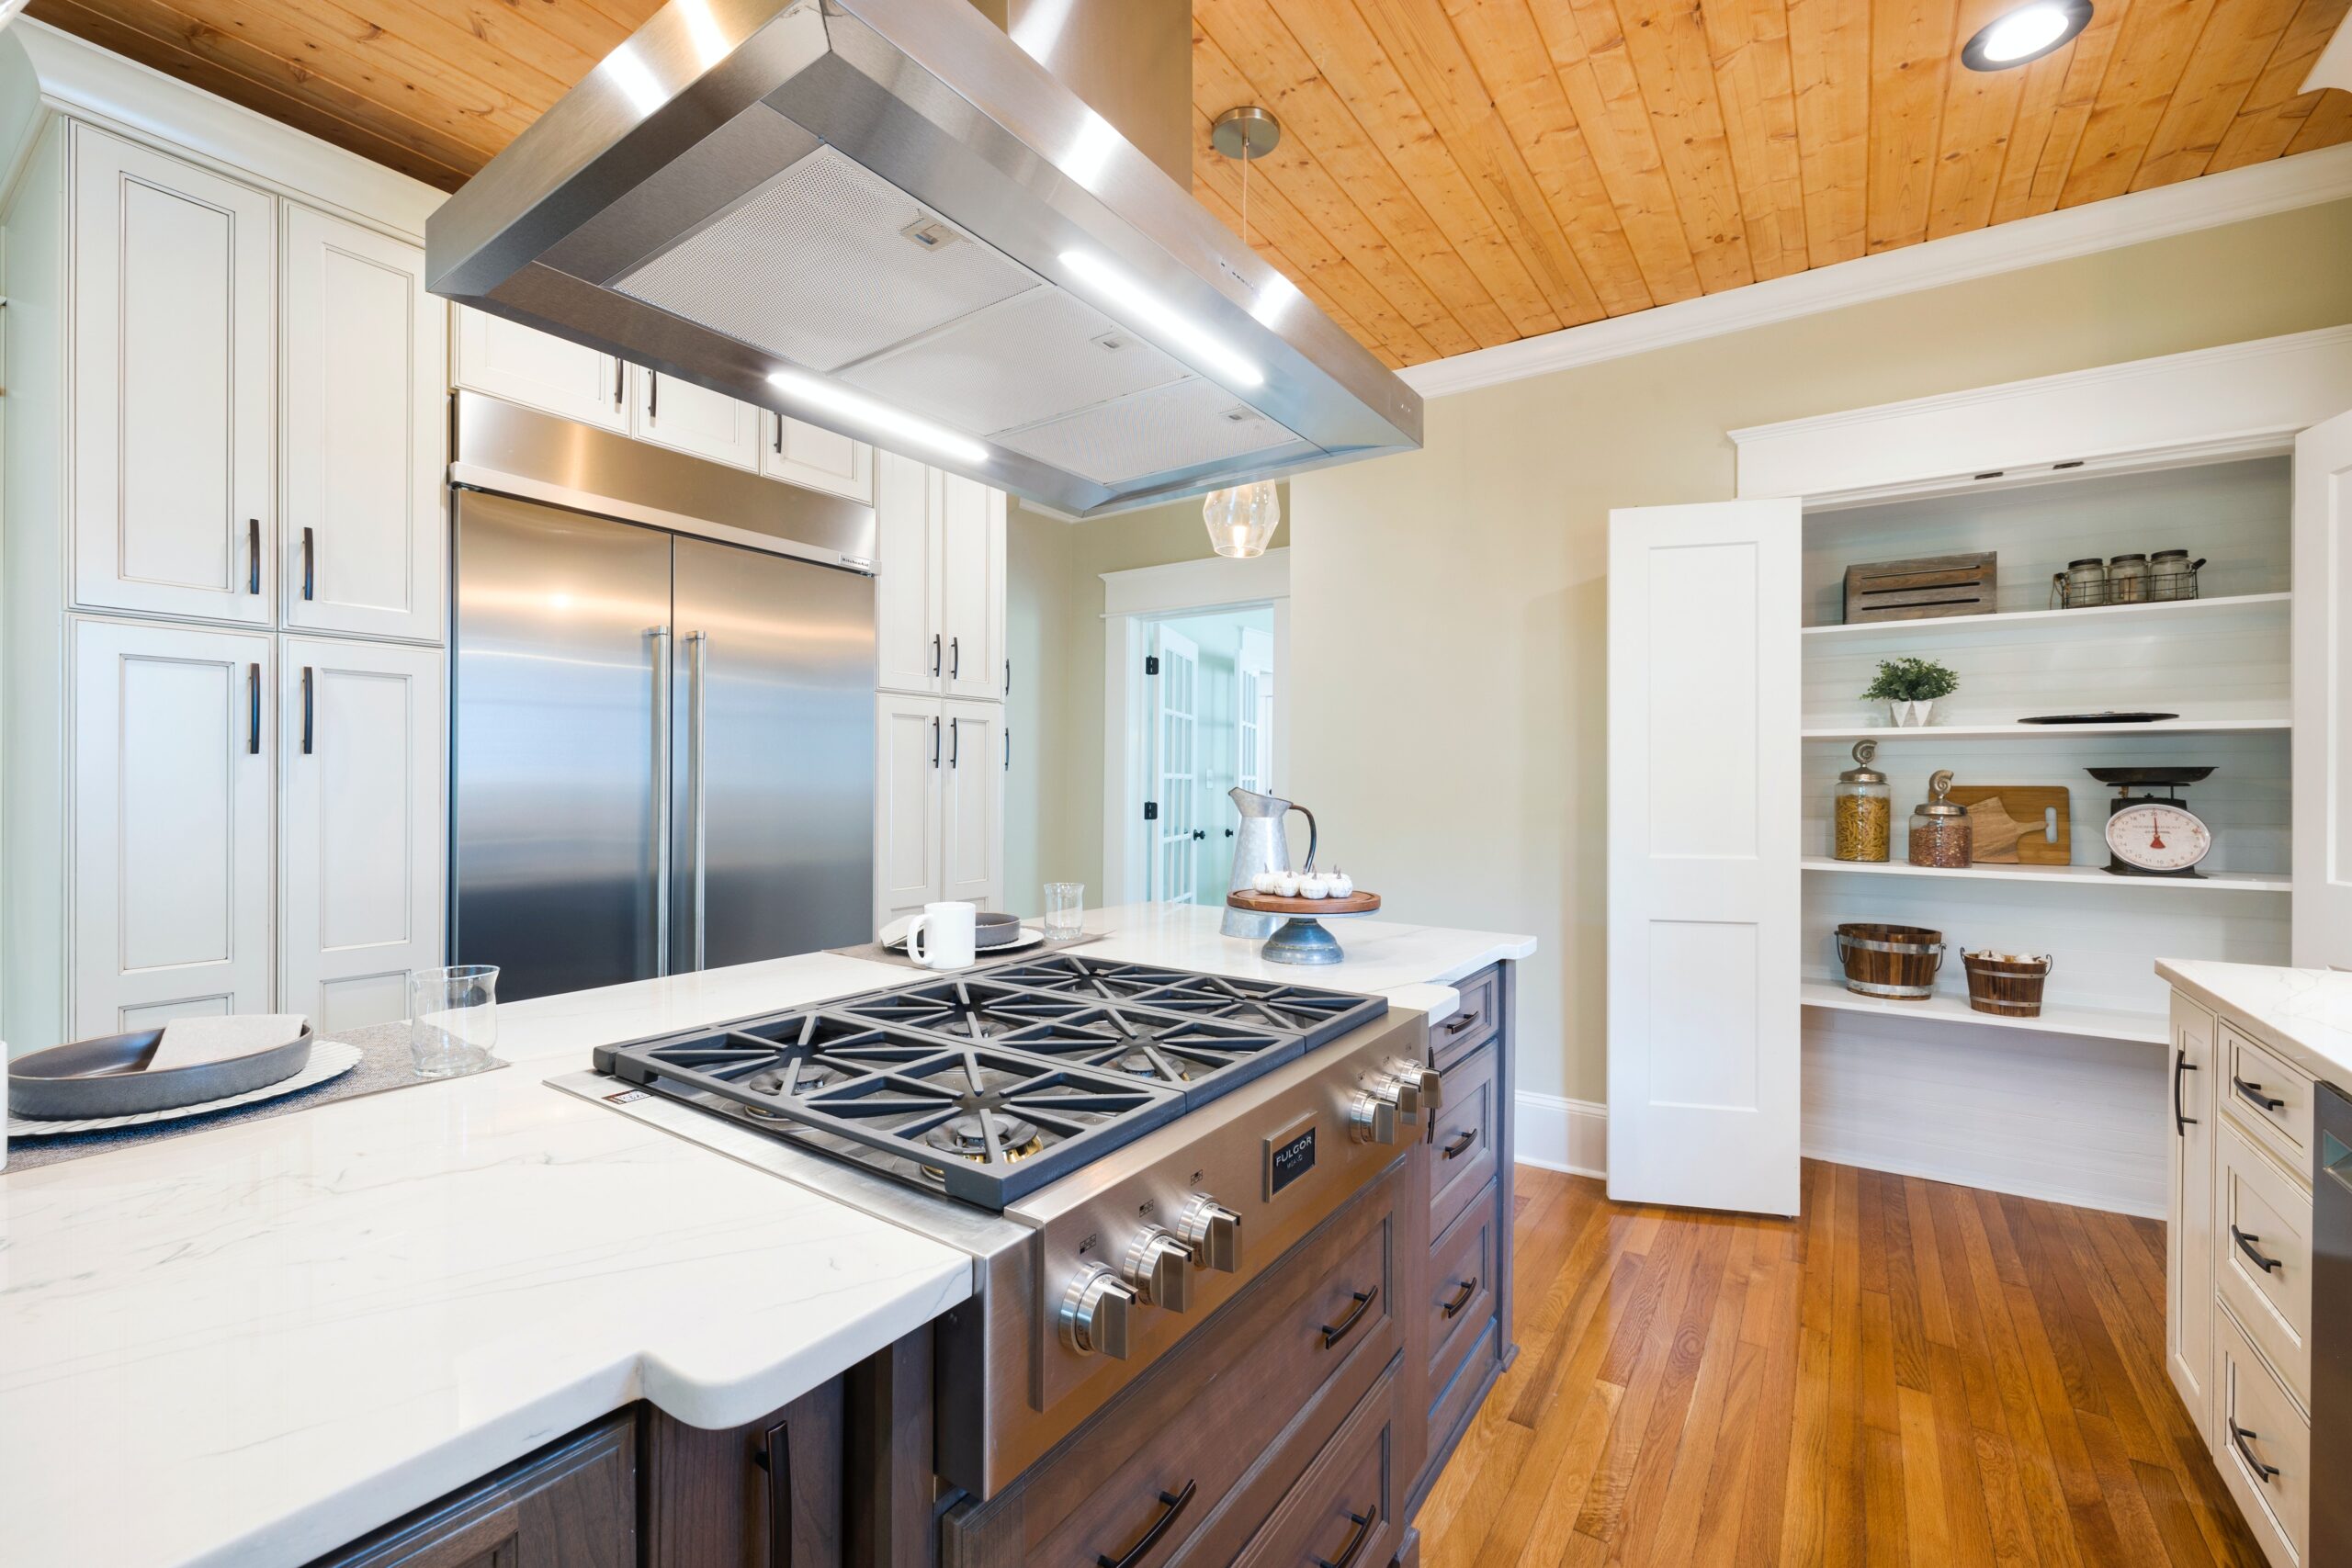 How to install a range hood vent through ceiling? Proper ventilation in the kitchen is essential for a pleasant cooking experience. One crucial component of a well-ventilated kitchen is a range hood vent.